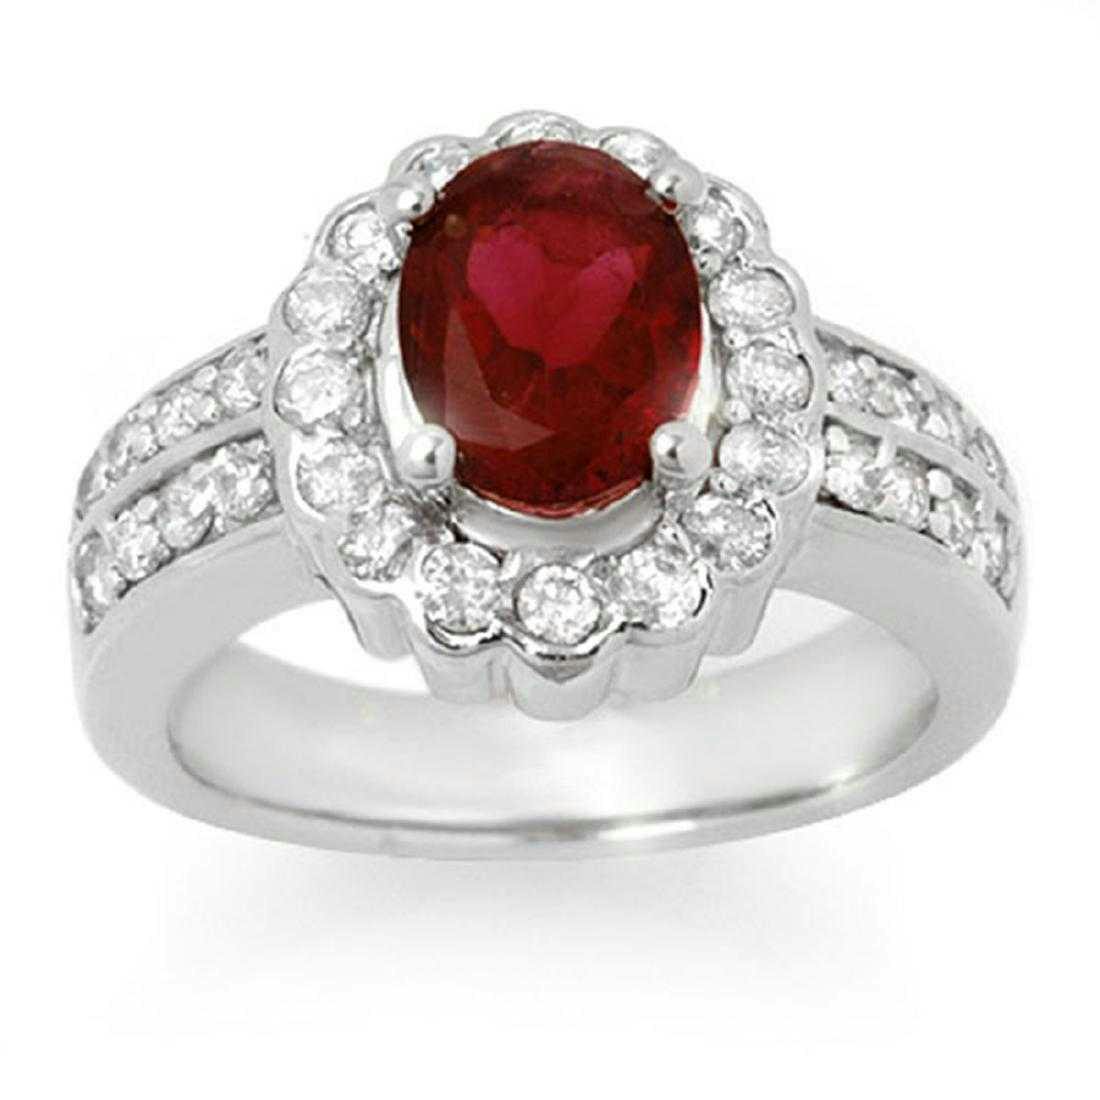 rubellite ring - expensive engagement ring stones